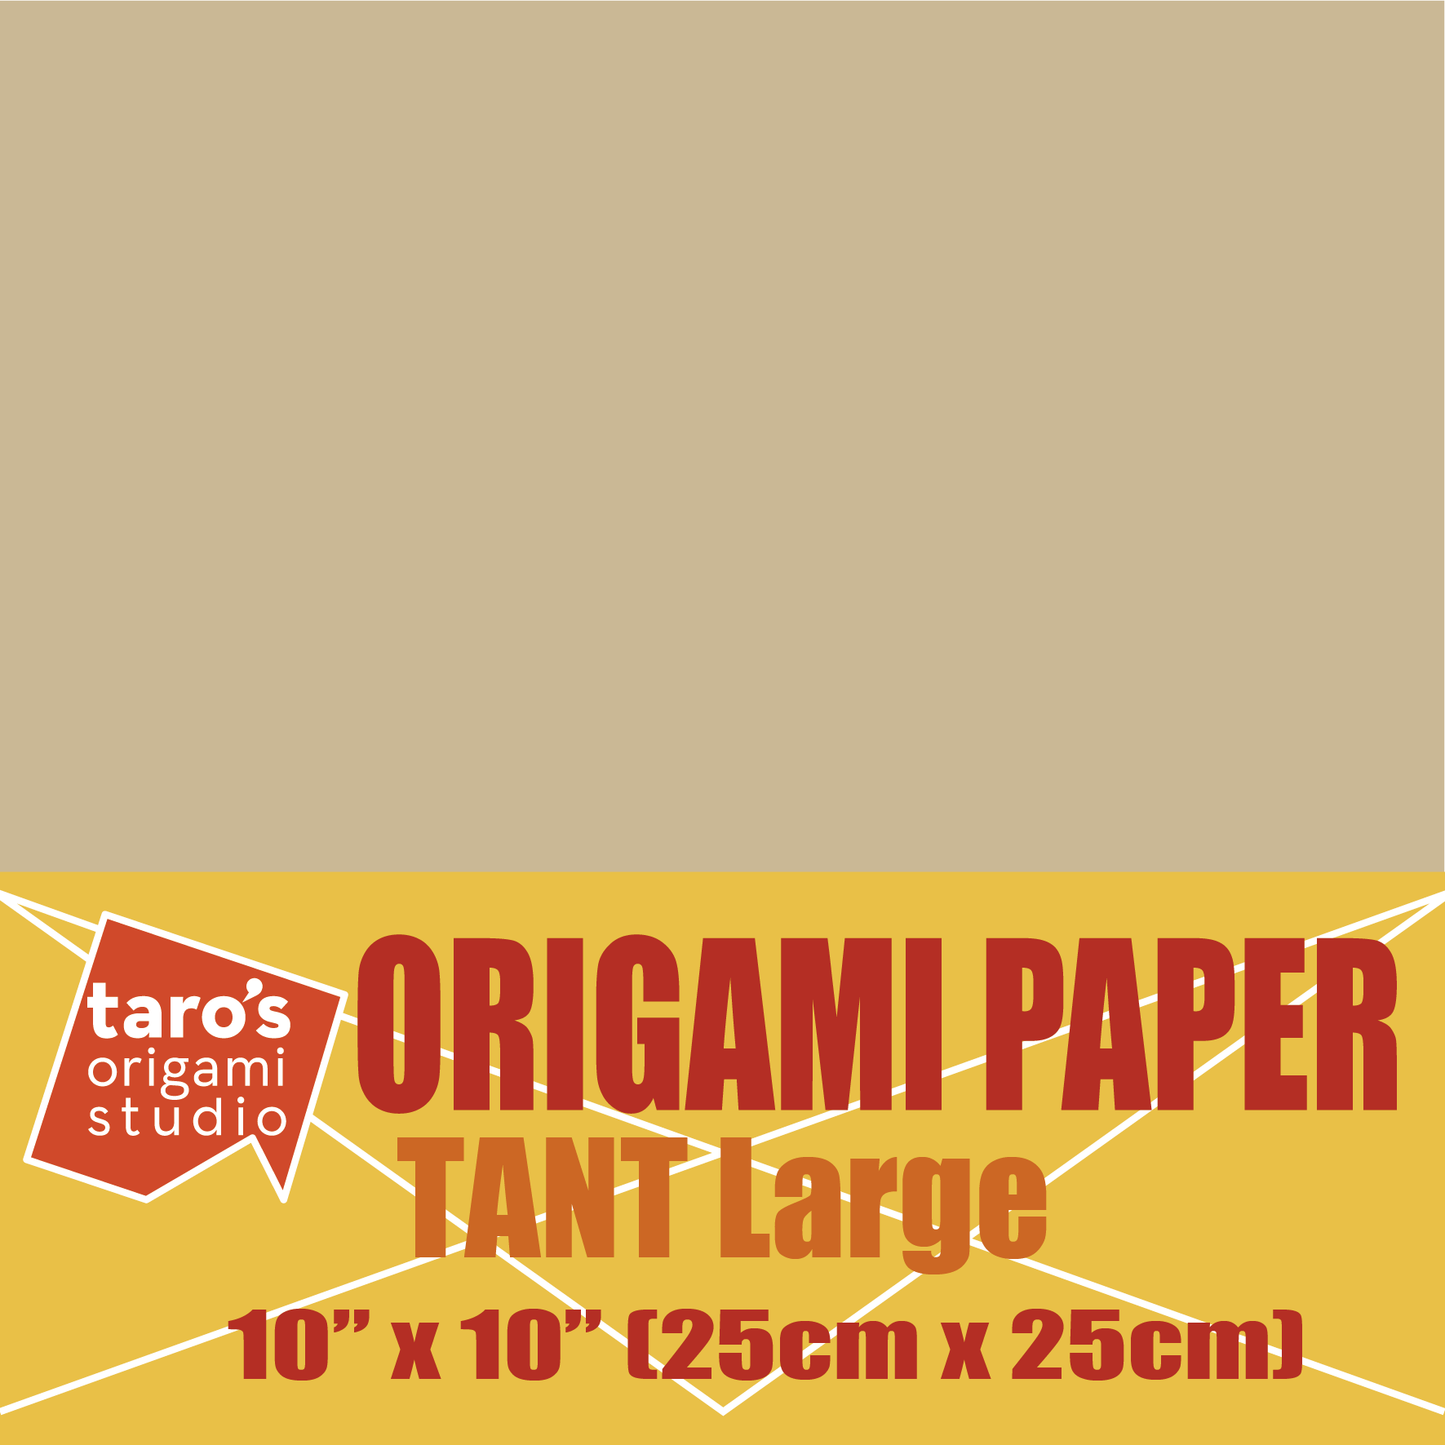 TANT Large 10 Inch (25 cm) Double Sided Single Color (Beige) 20 Sheets (All Same Color) for Origami Artist from Beginner to Expert (Made in Japan)